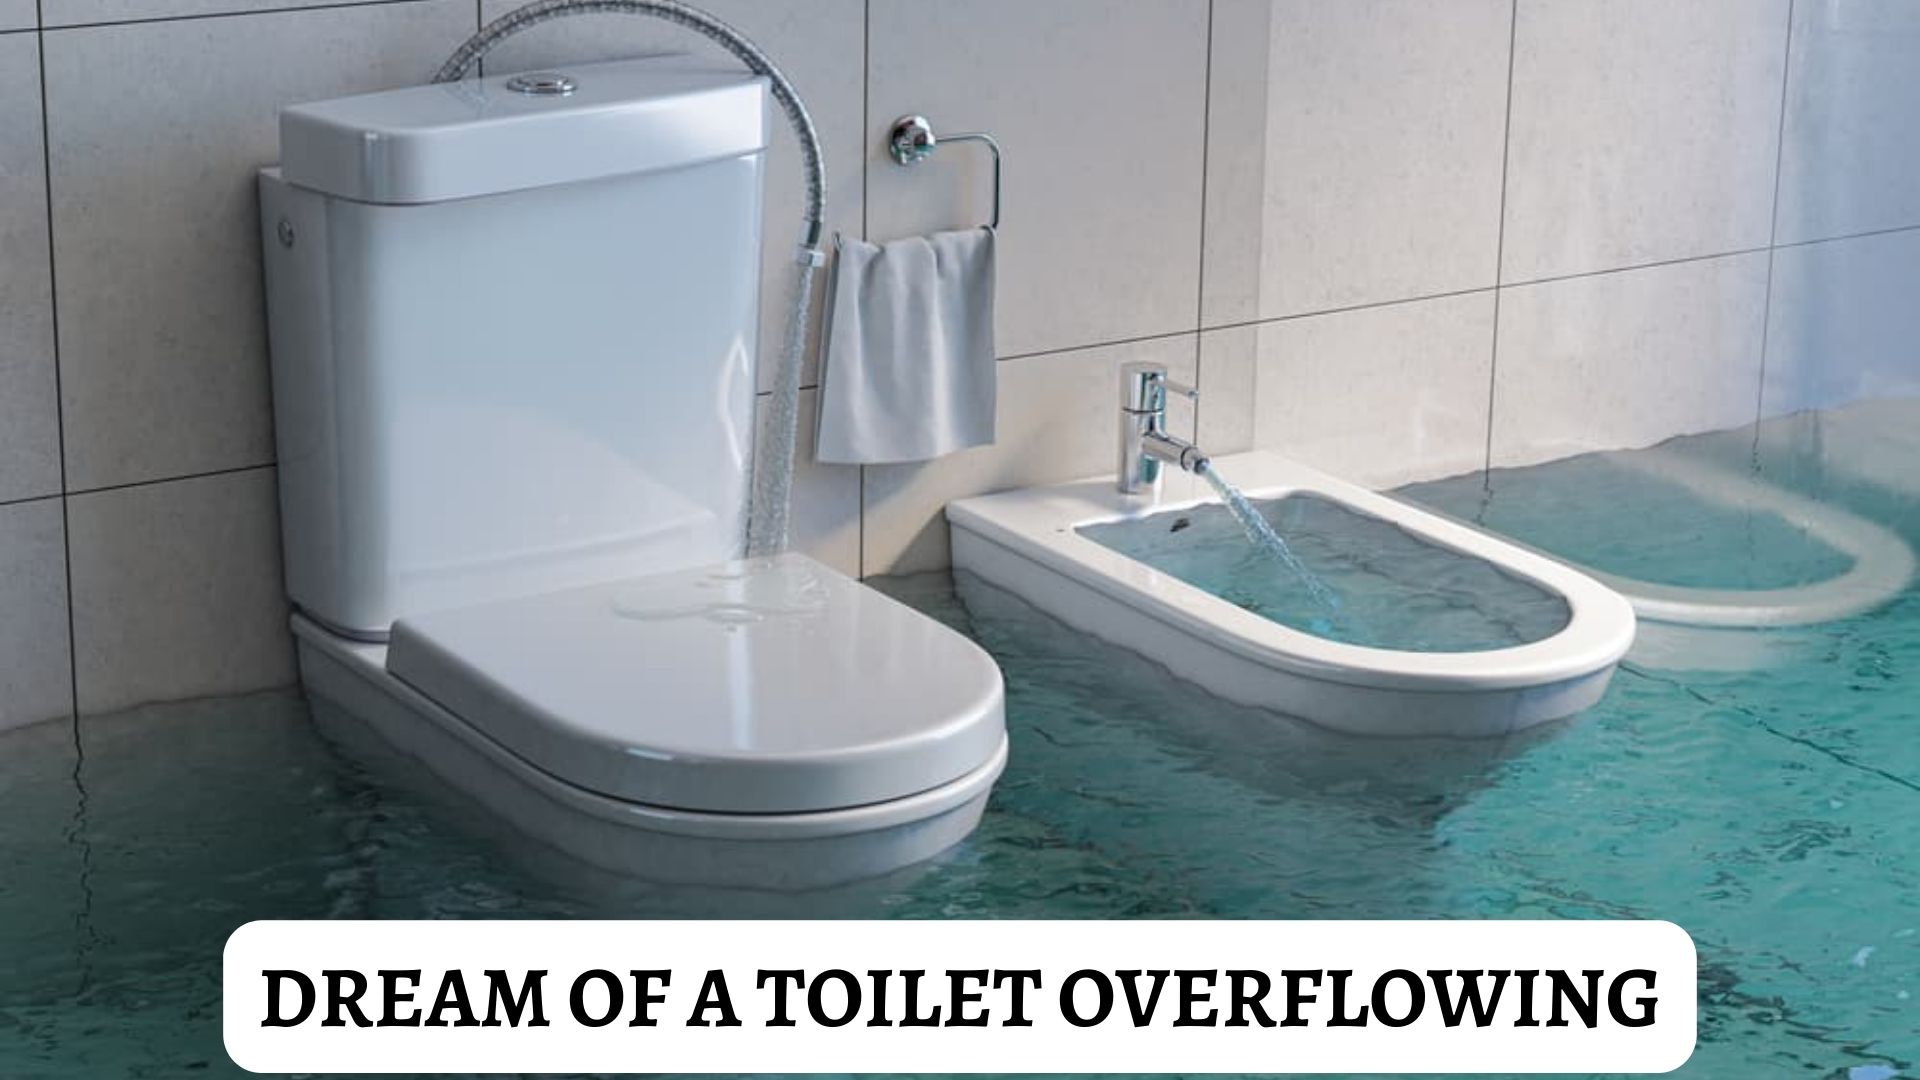 Dream Of A Toilet Overflowing - Meaning & Symbolism